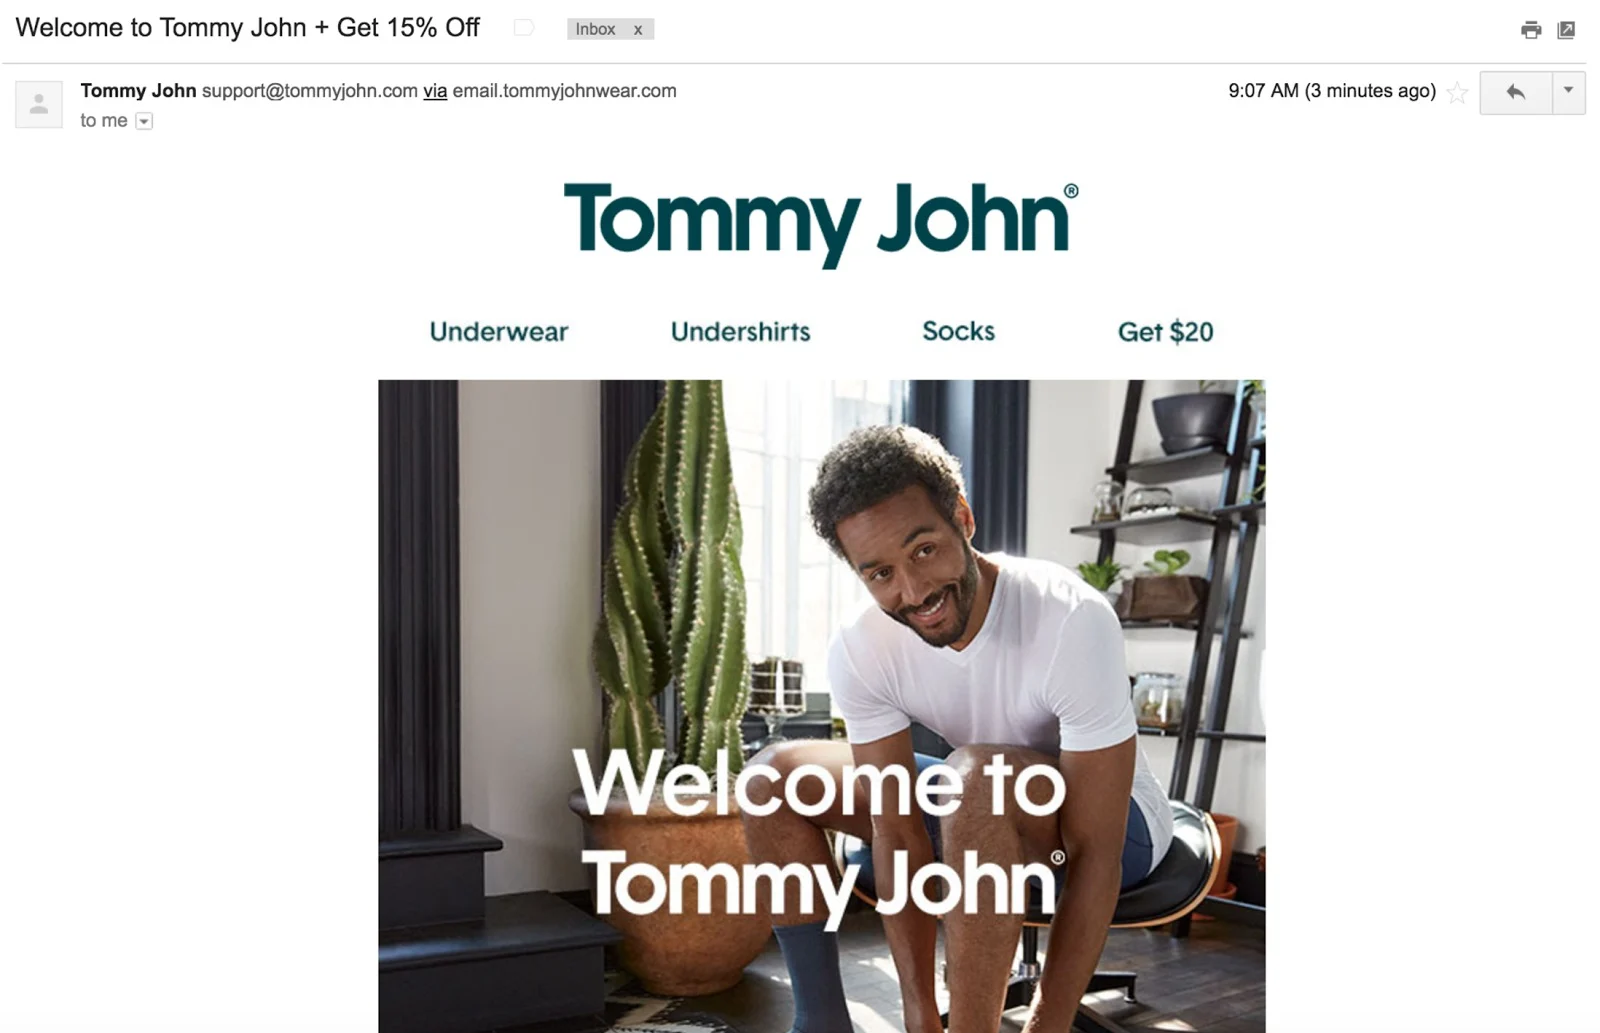 Tommy John Text Message Marketing Example – 02.21.2021